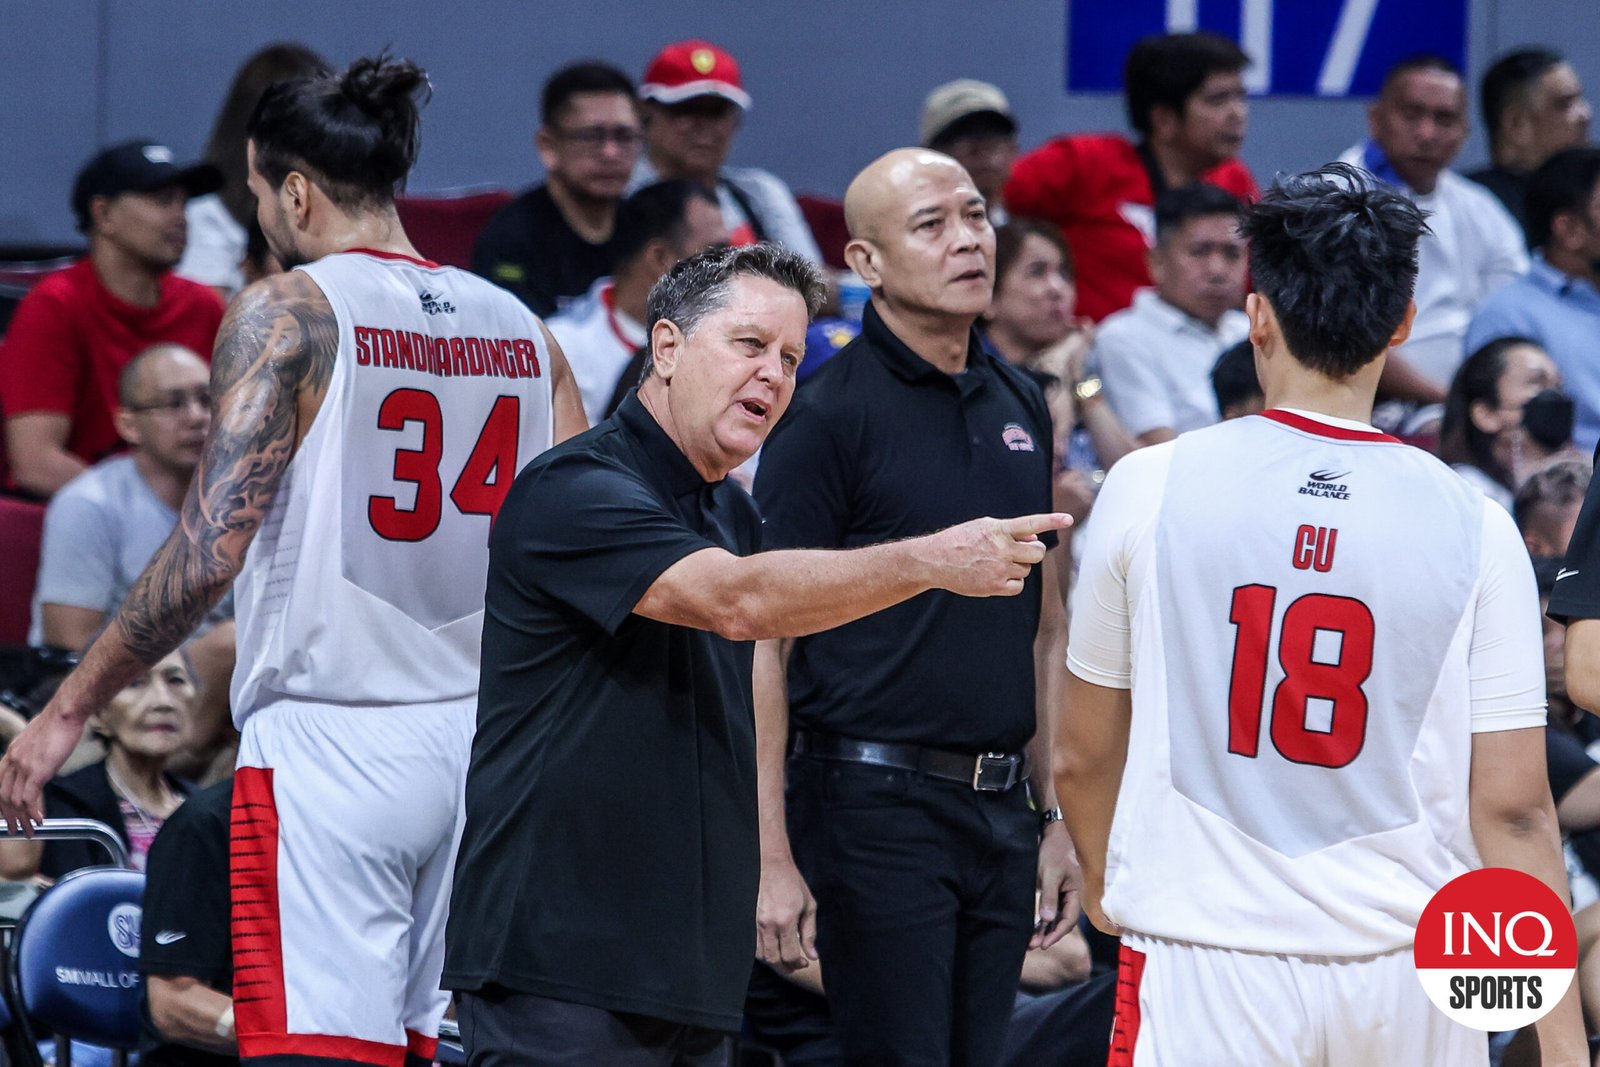 PBA: Tim Cone needs time figuring out Meralco’s game plan